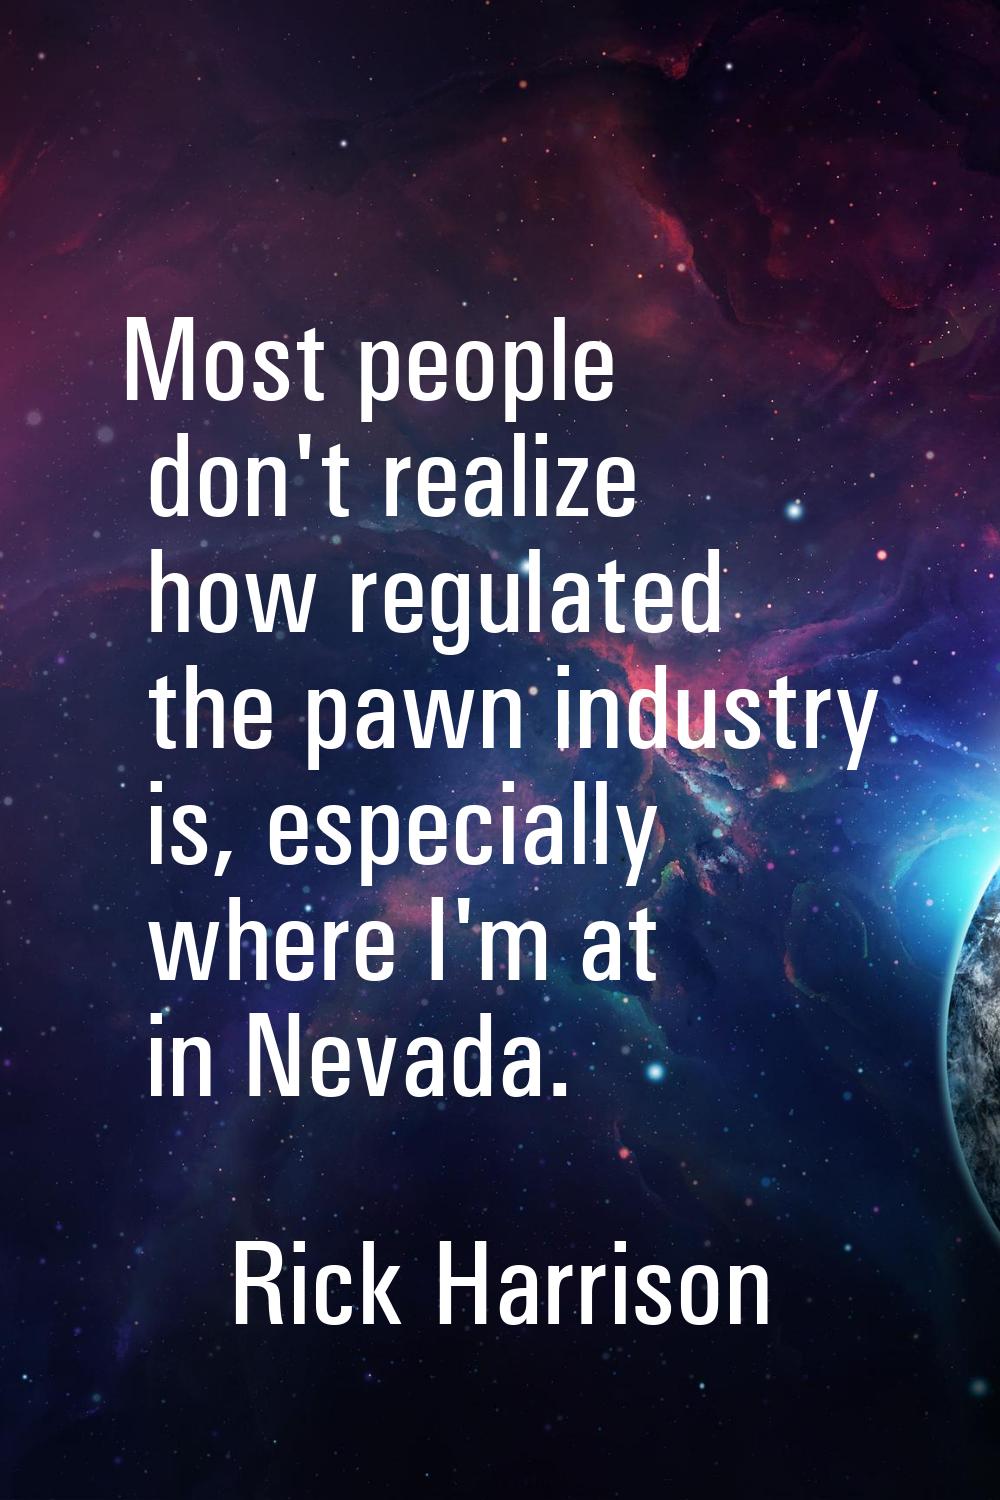 Most people don't realize how regulated the pawn industry is, especially where I'm at in Nevada.